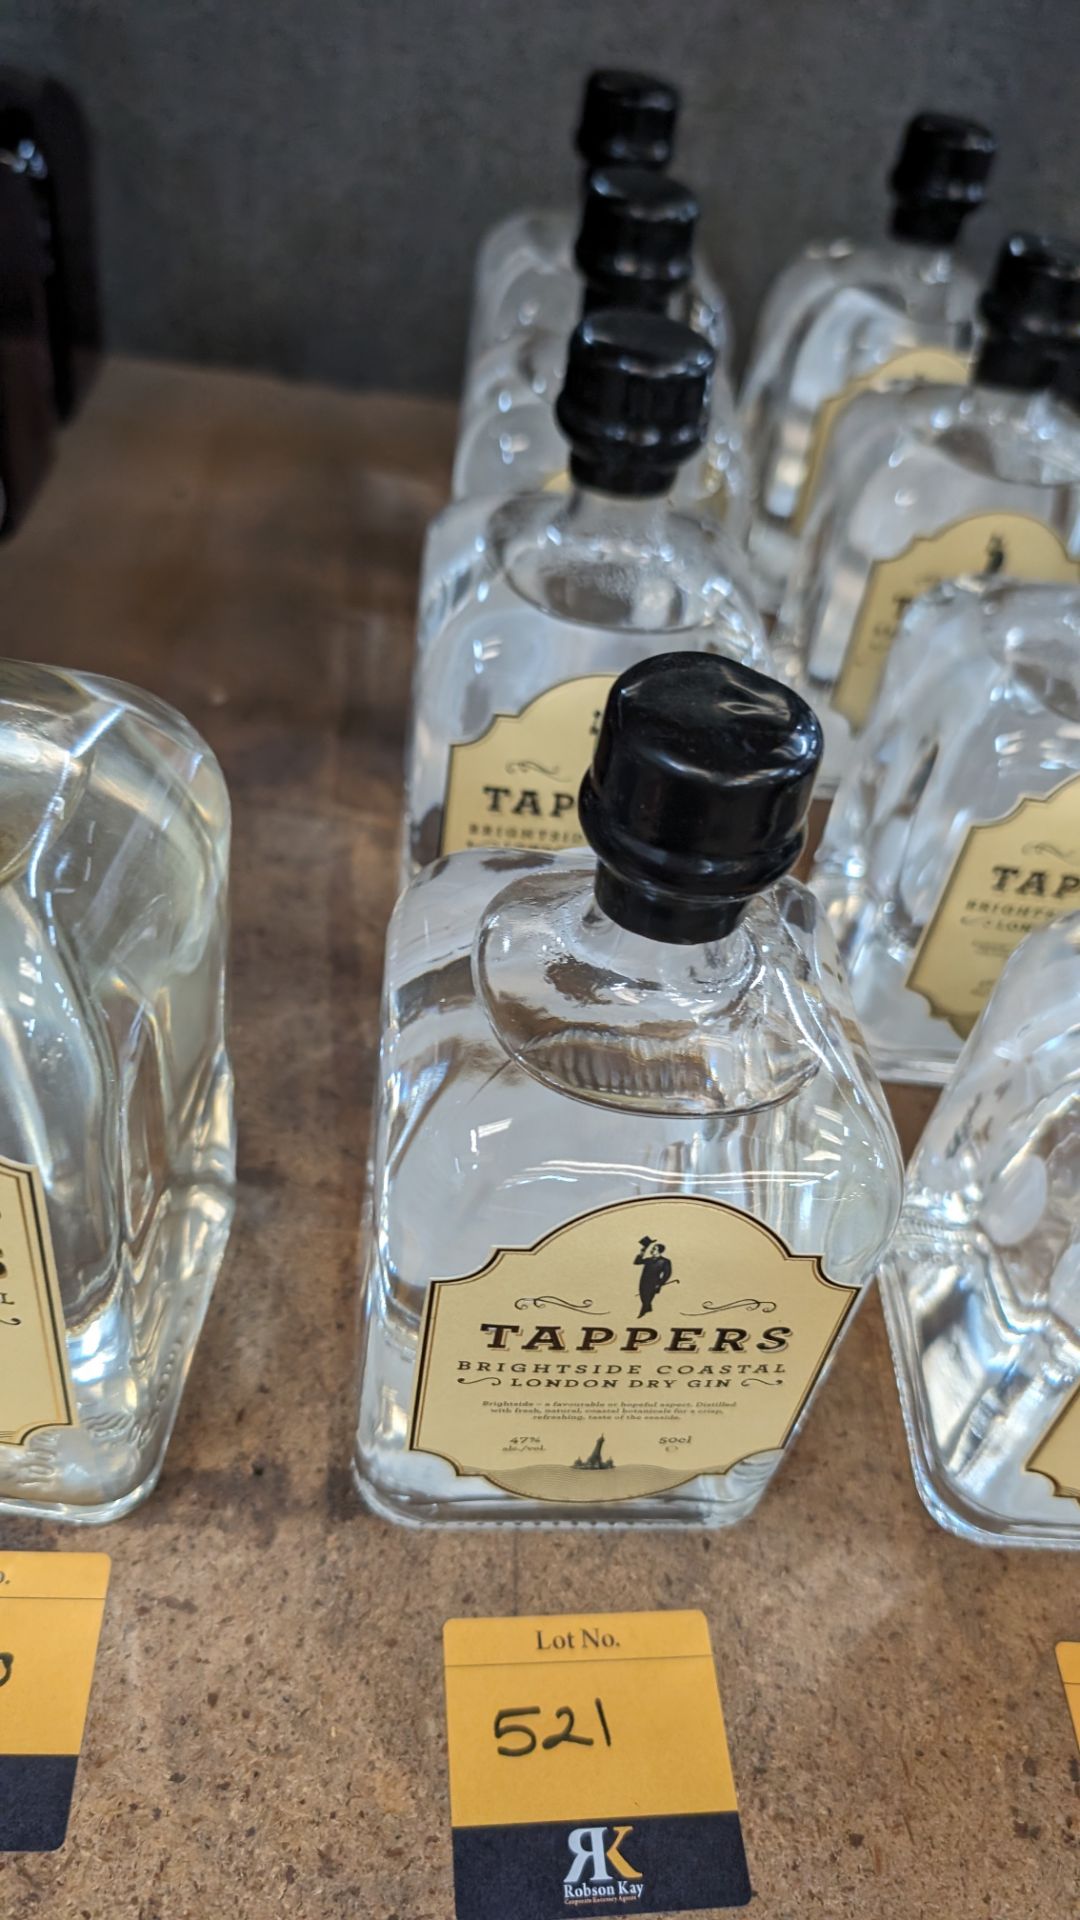 4 off 500ml bottles of Tappers 47% ABV Brightside Coastal London Dry Gin. Sold under AWRS number XQ - Image 2 of 4